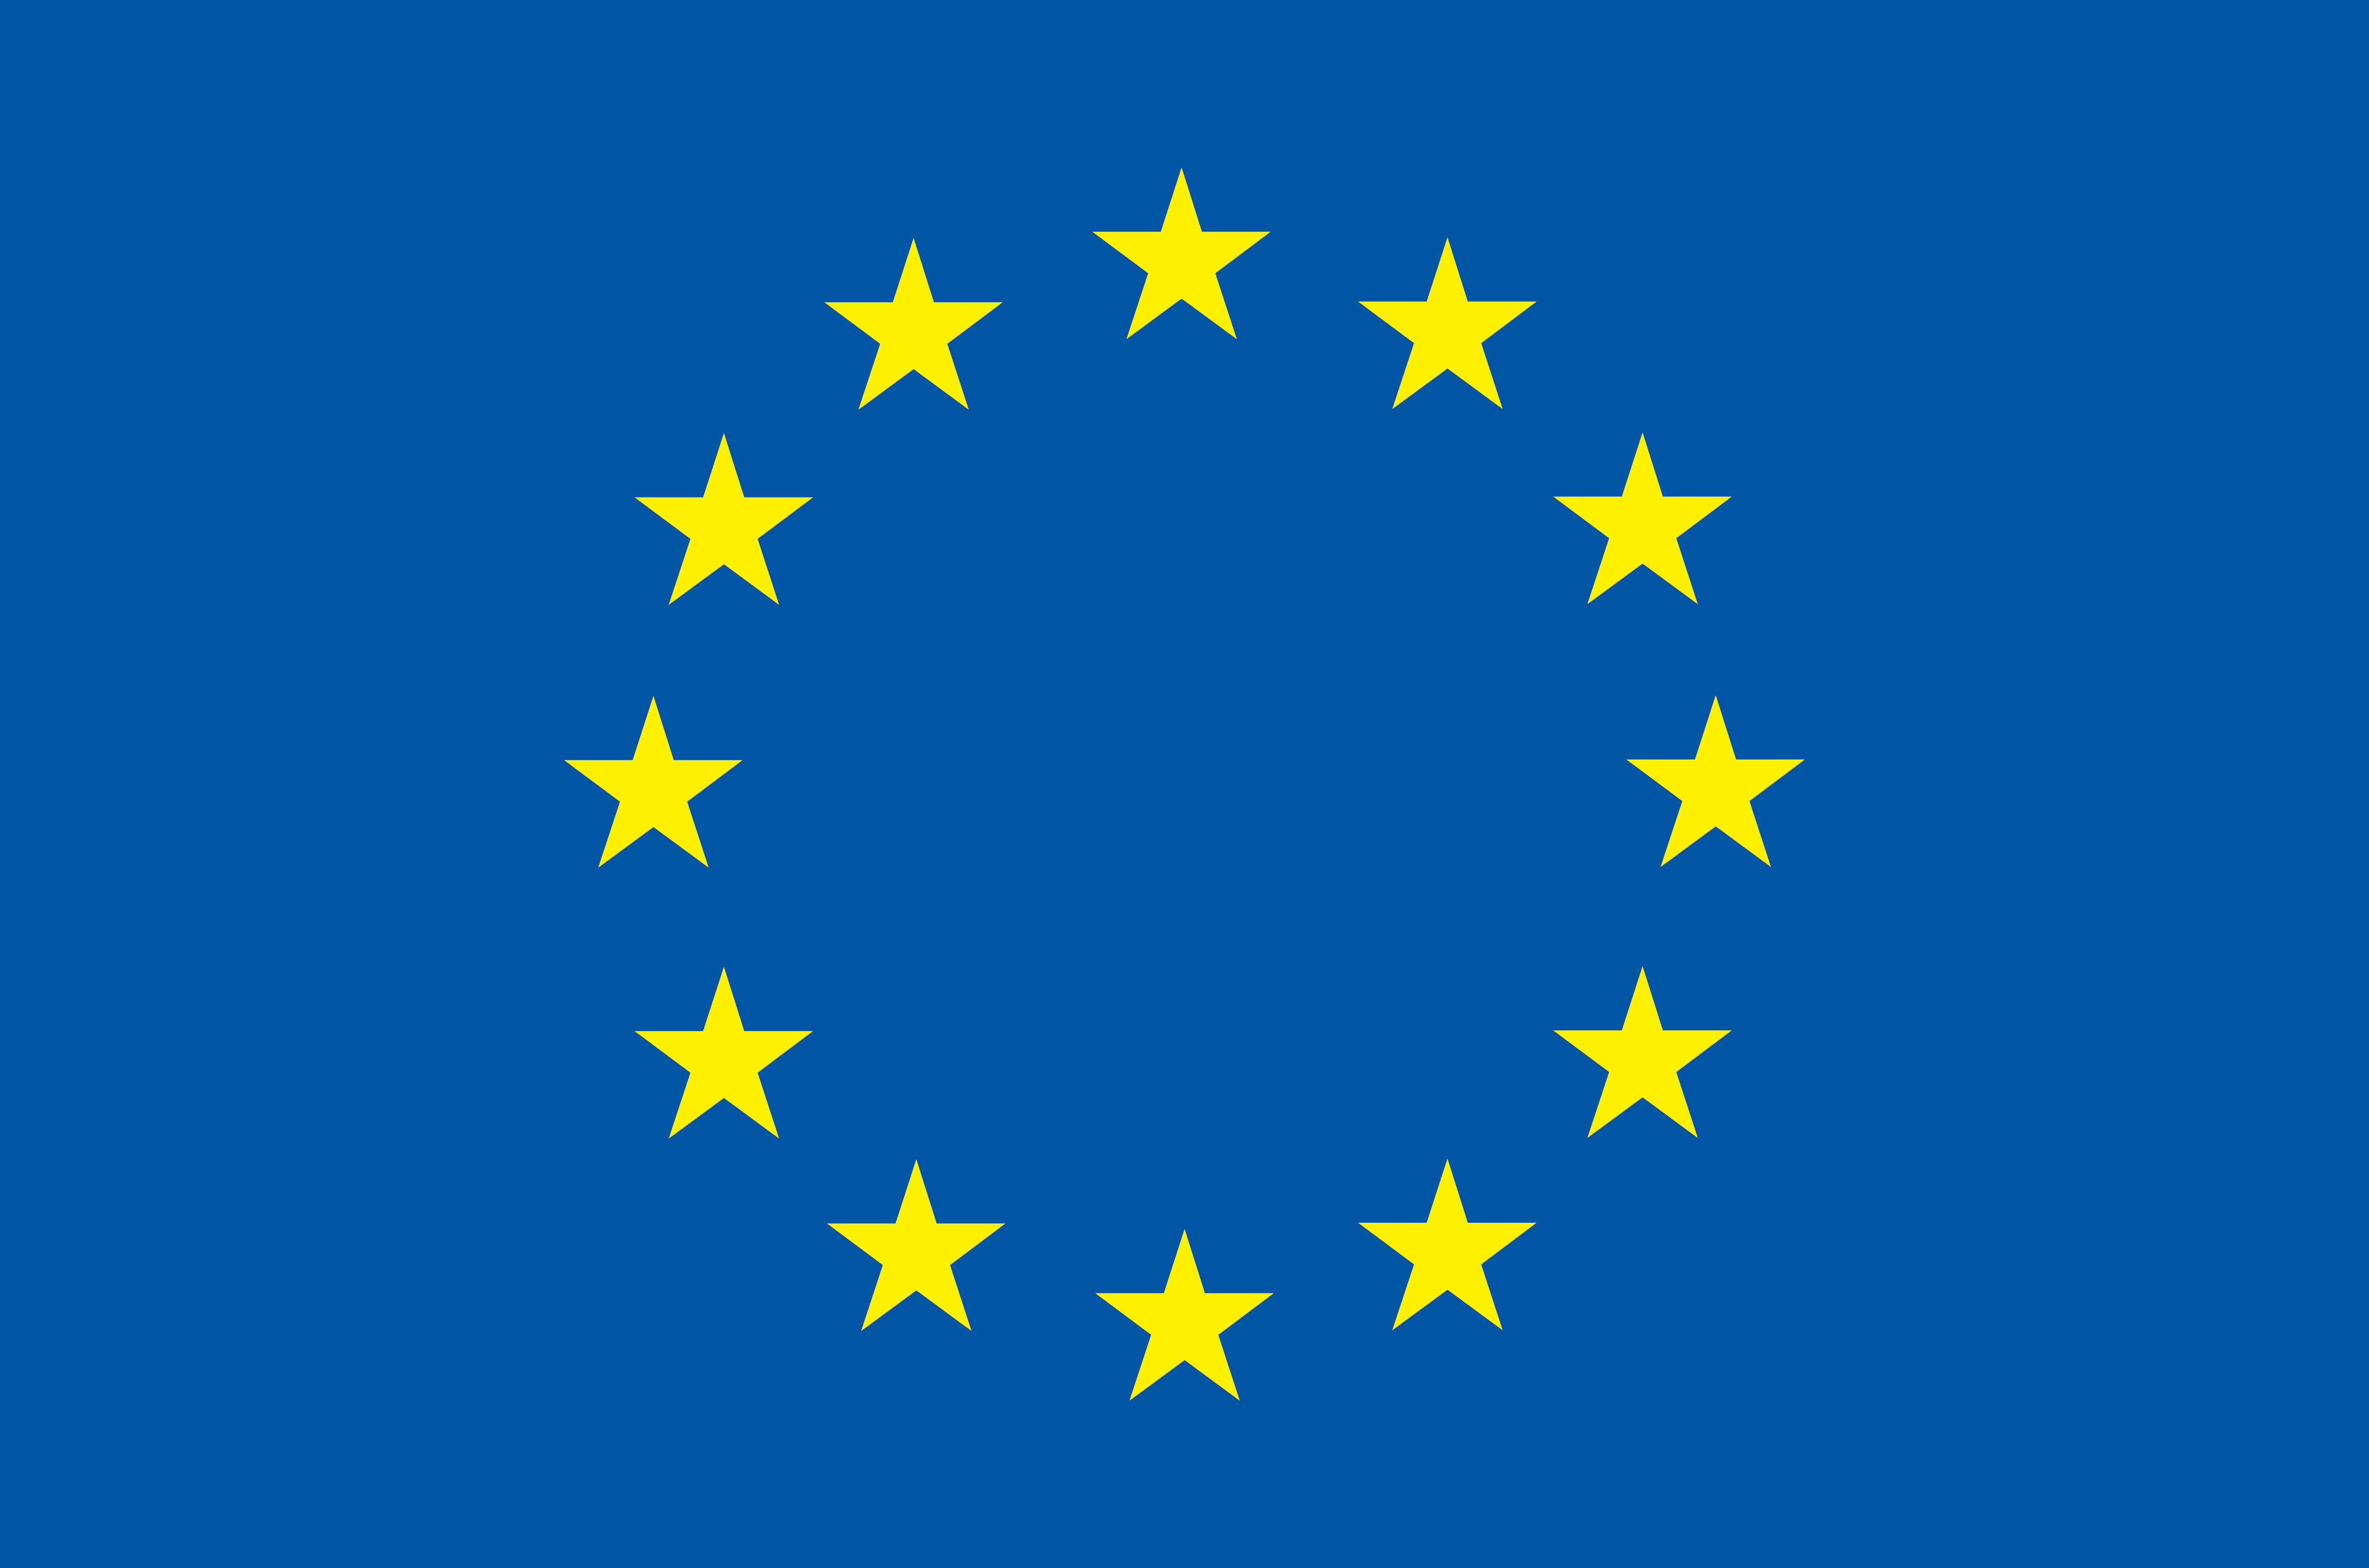 EU flag, royal blue with 12 yellow stars displayed in a circle